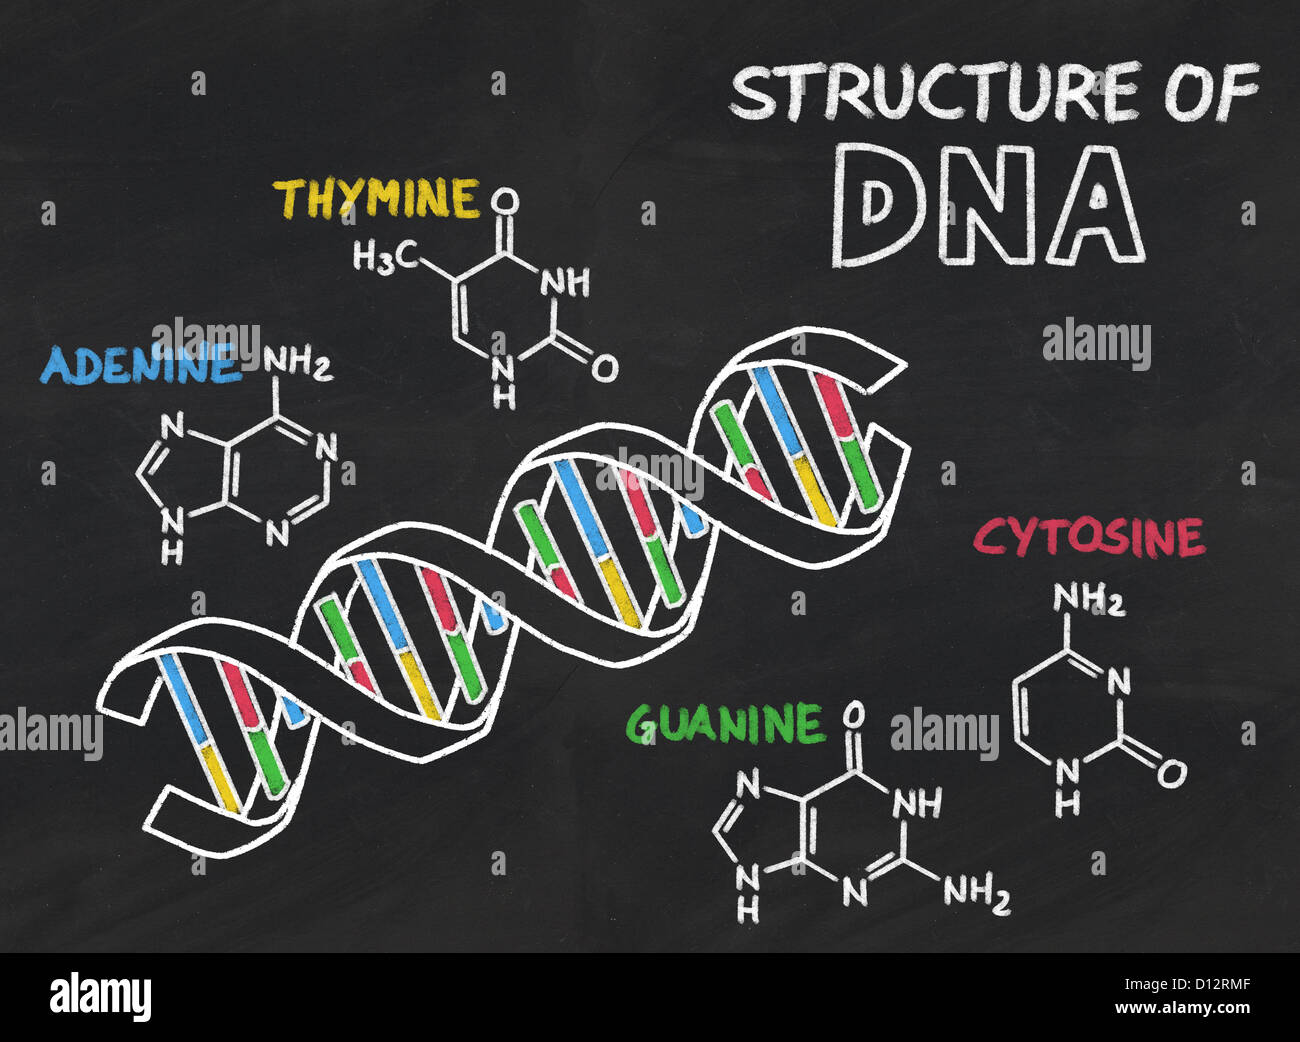 chemical structure of DNA on a blackboard Stock Photo